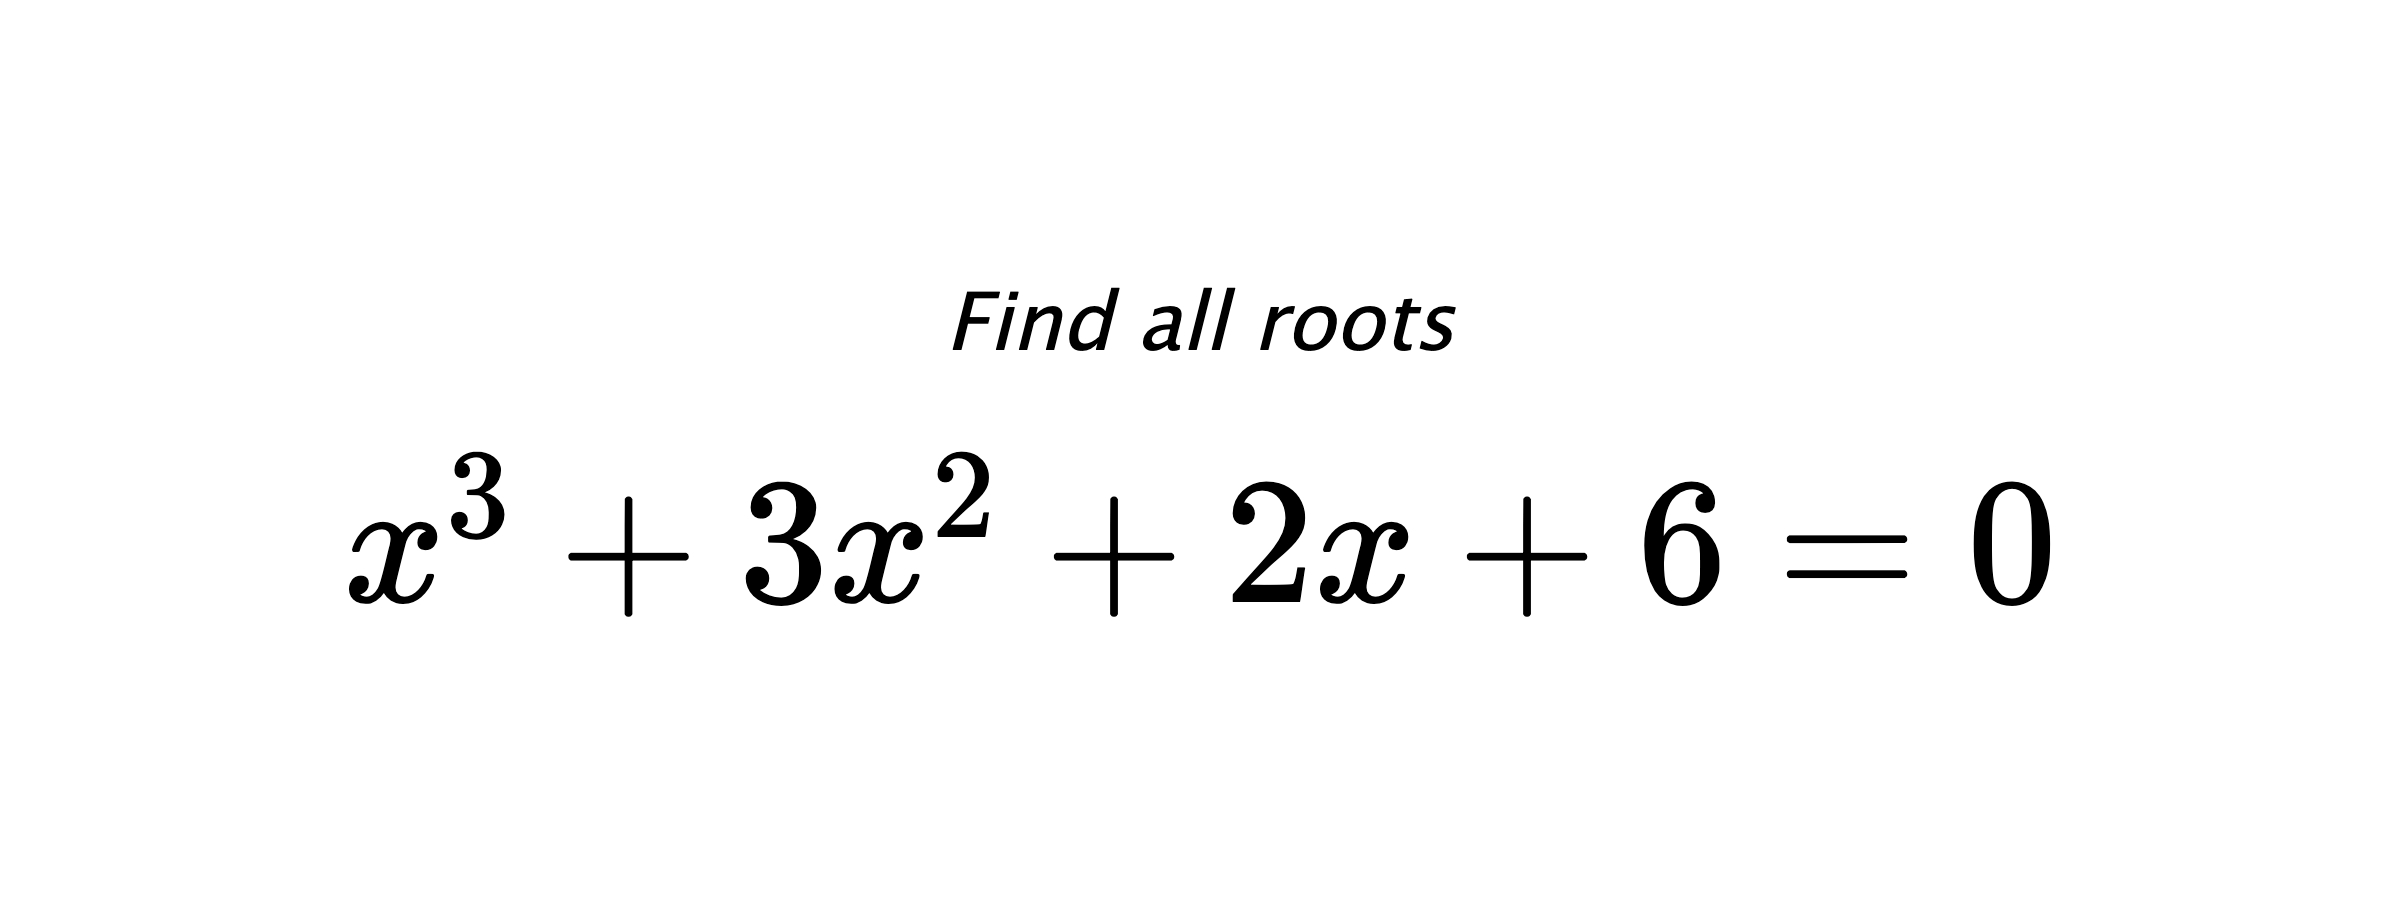 Find all roots $ x^{3}+3x^{2}+2x+6=0 $